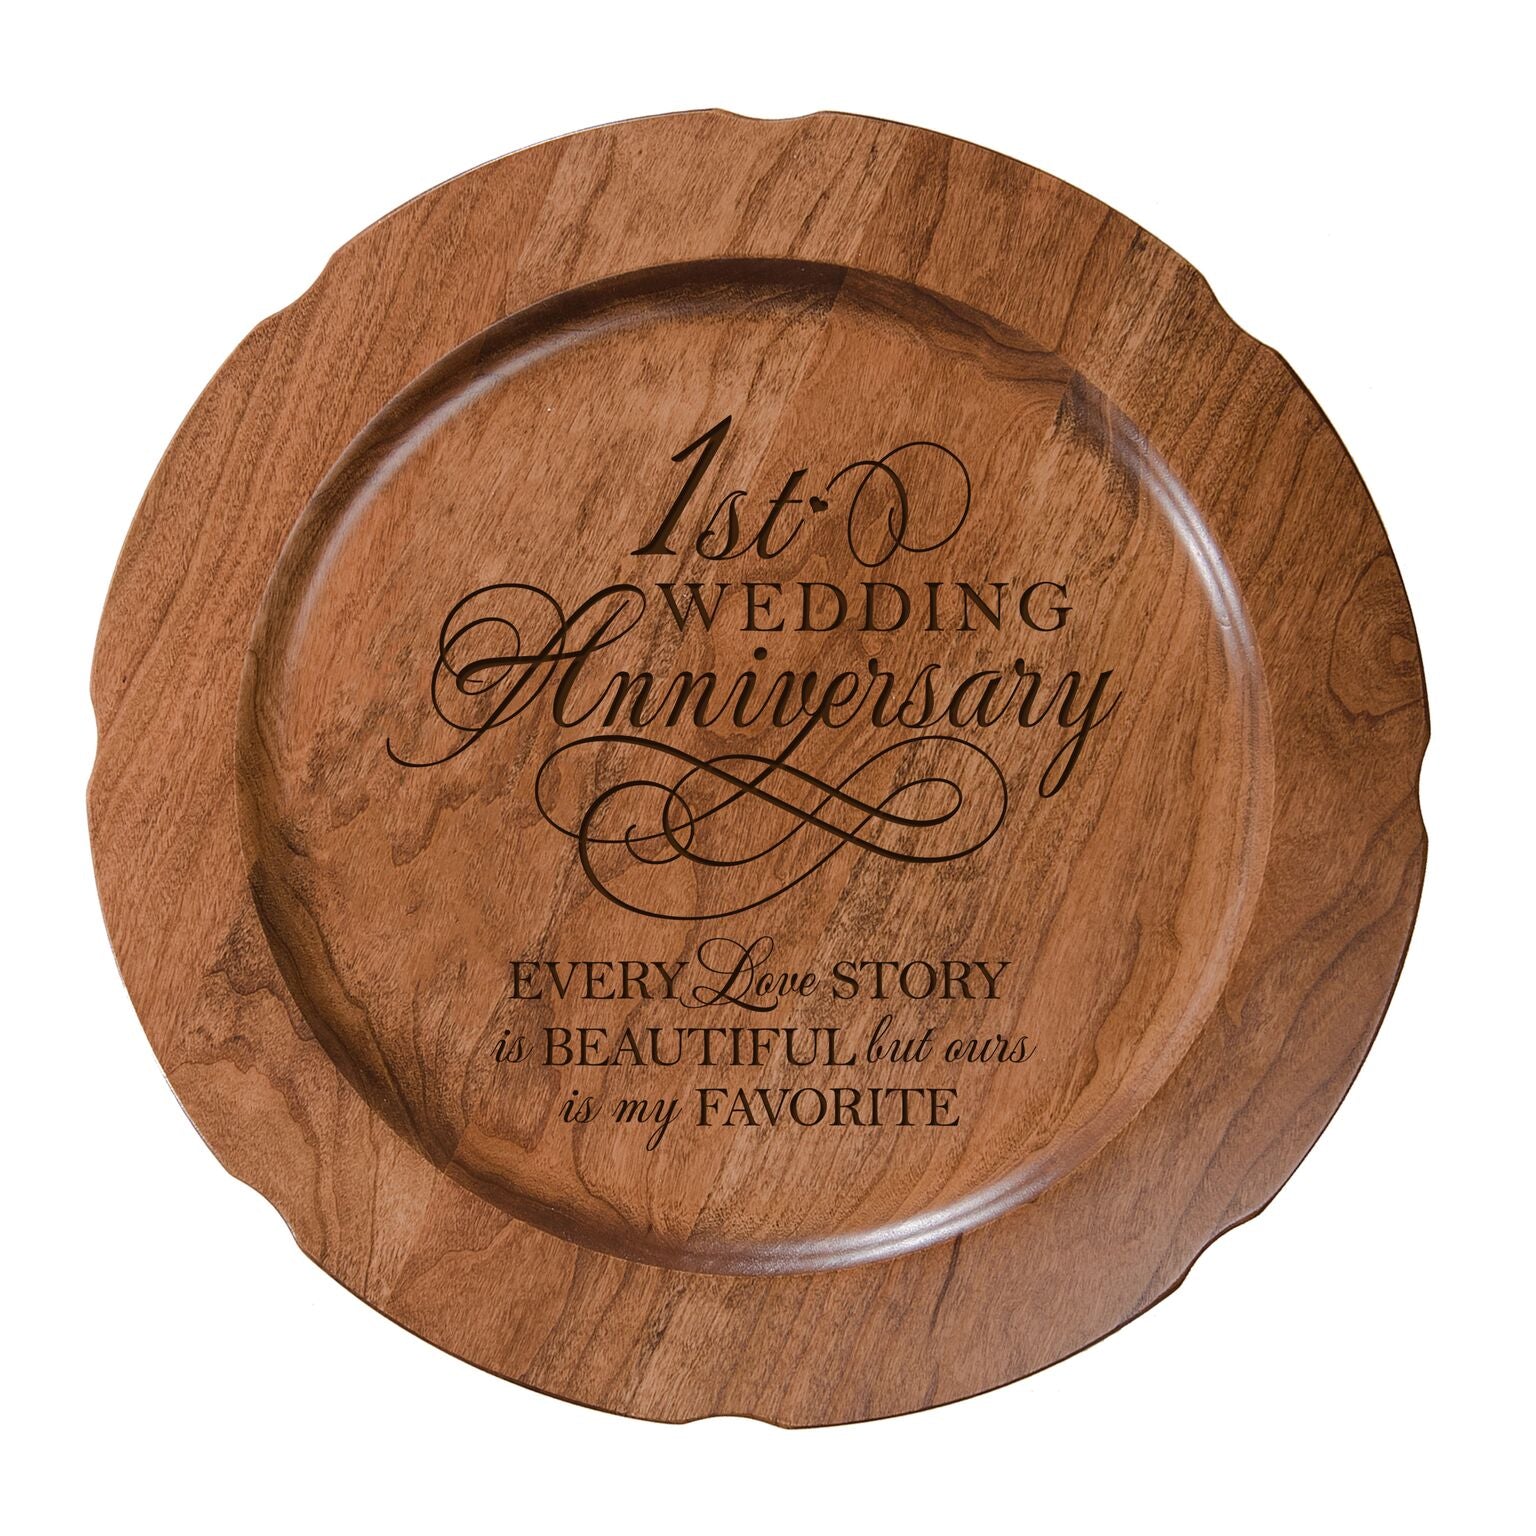 Decorative 1st Wedding Anniversary Plate - Gift for Mr and Mrs - LifeSong Milestones